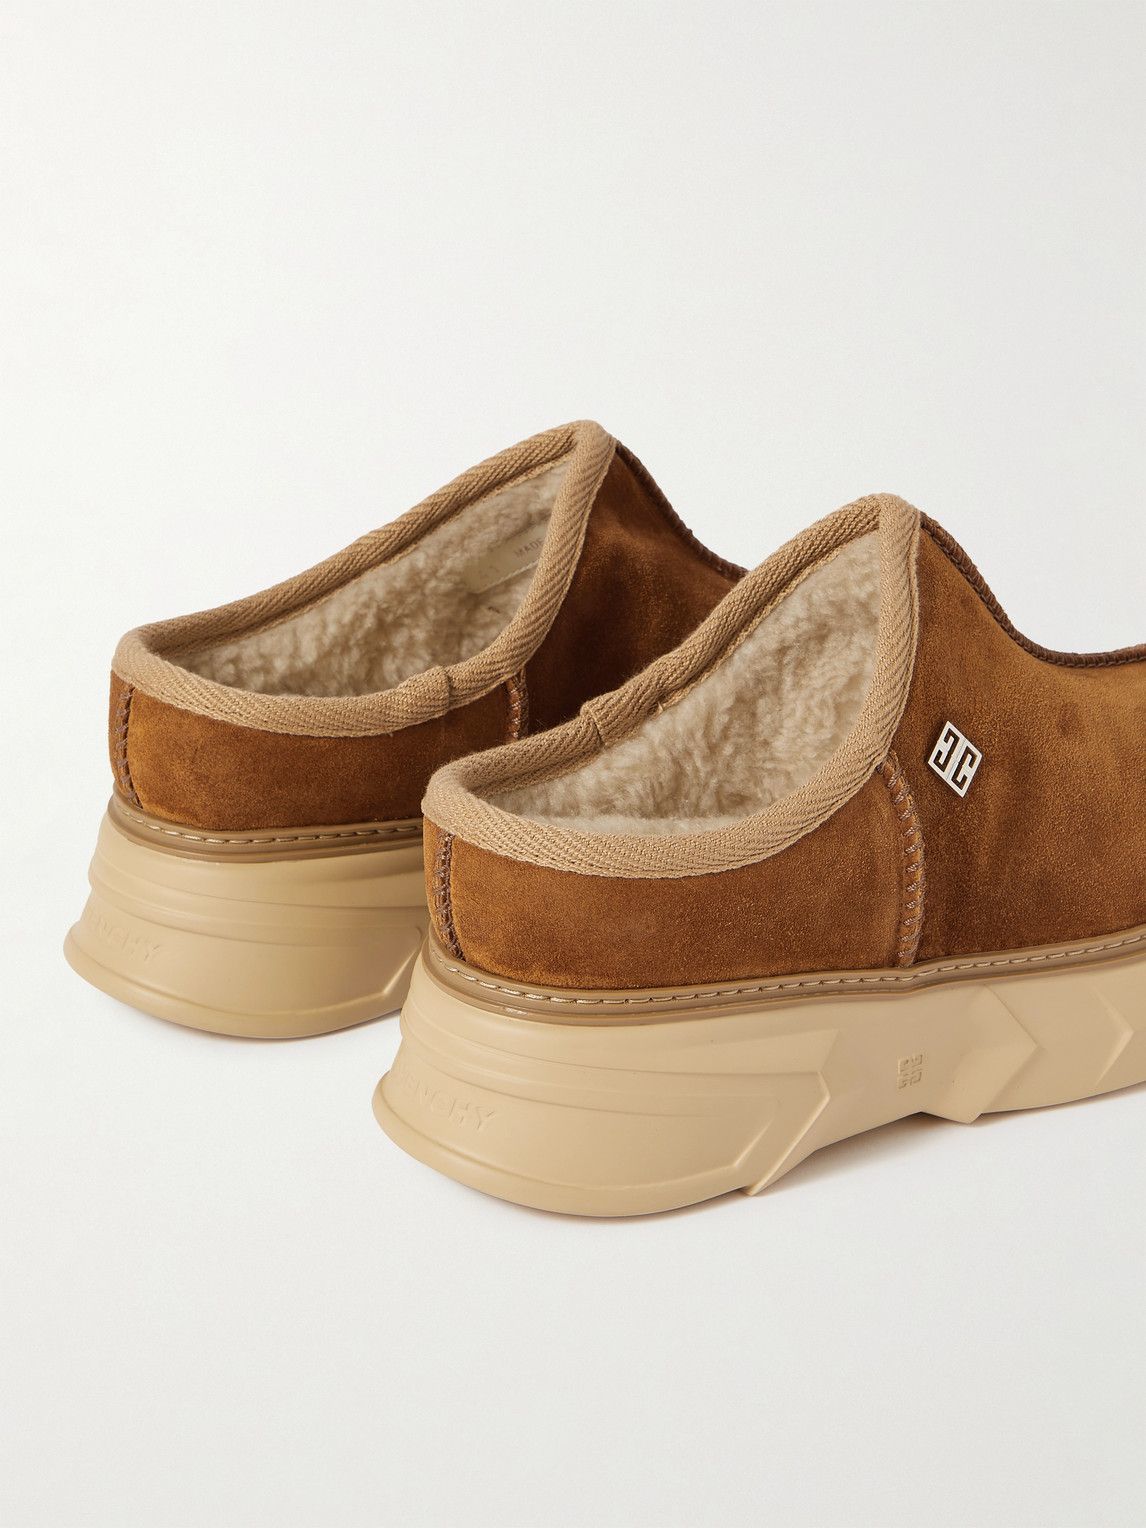 Givenchy - Winter Mallow Faux Shearling-Lined Suede Mules - Brown Givenchy